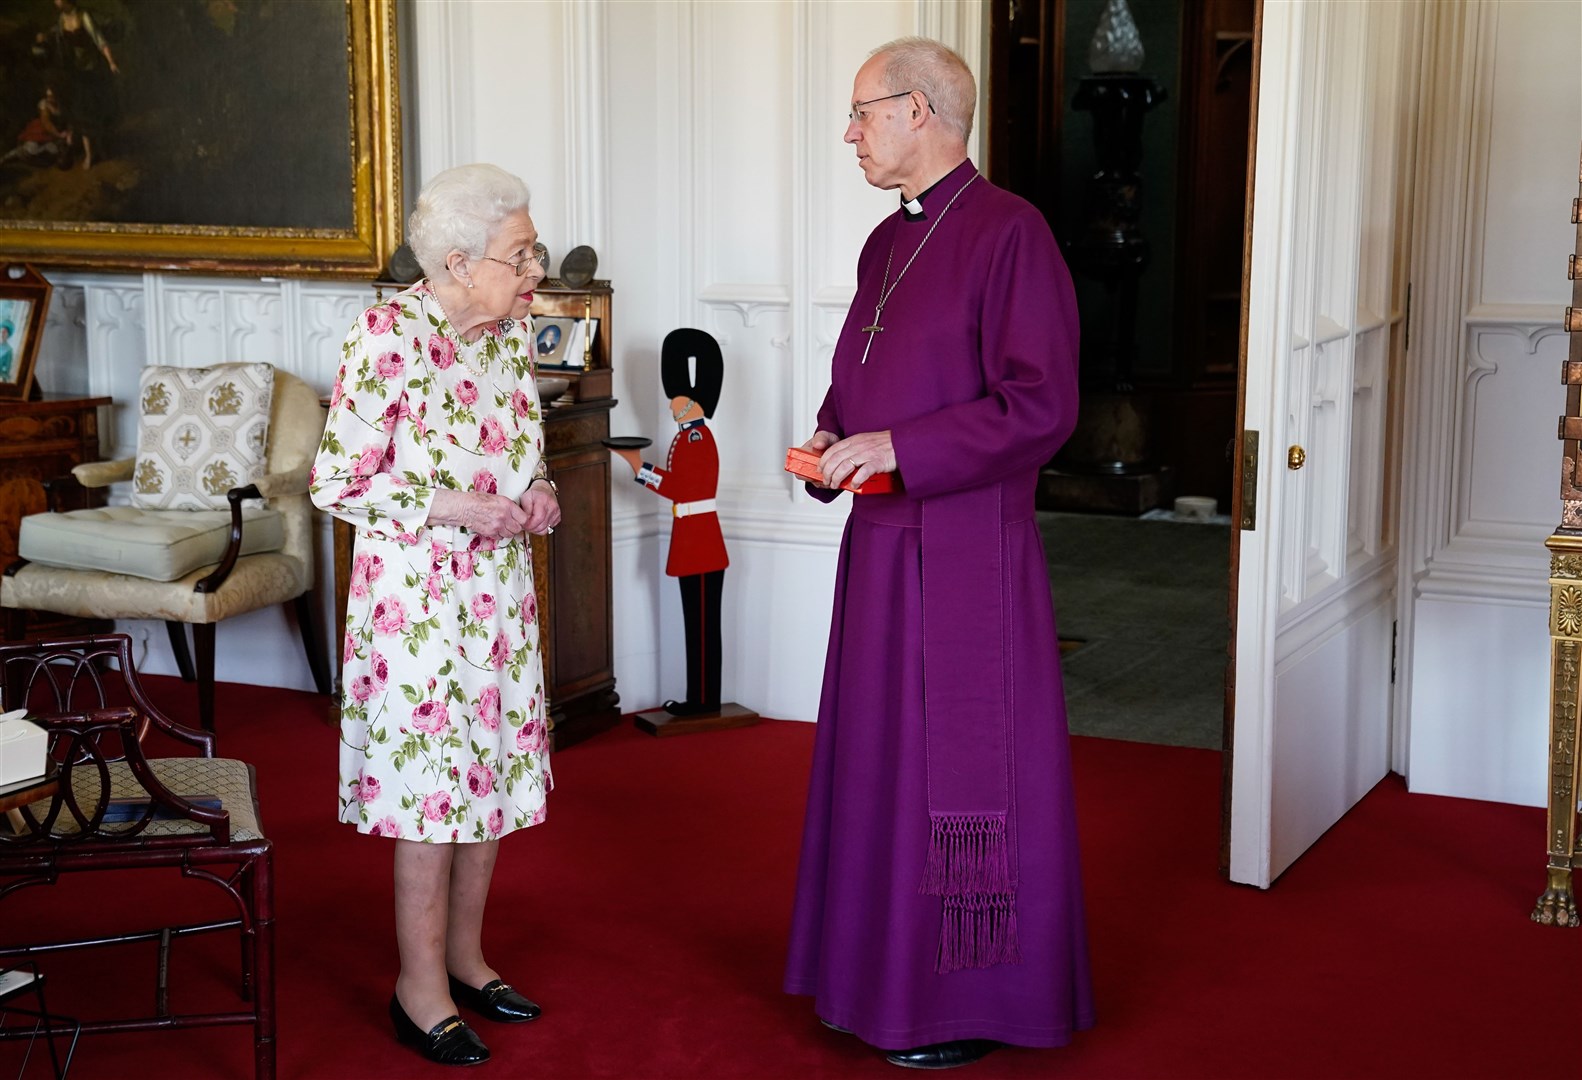 The Archbishop of Canterbury praised the Queen’s example after a life of service (Andrew Matthews/PA)